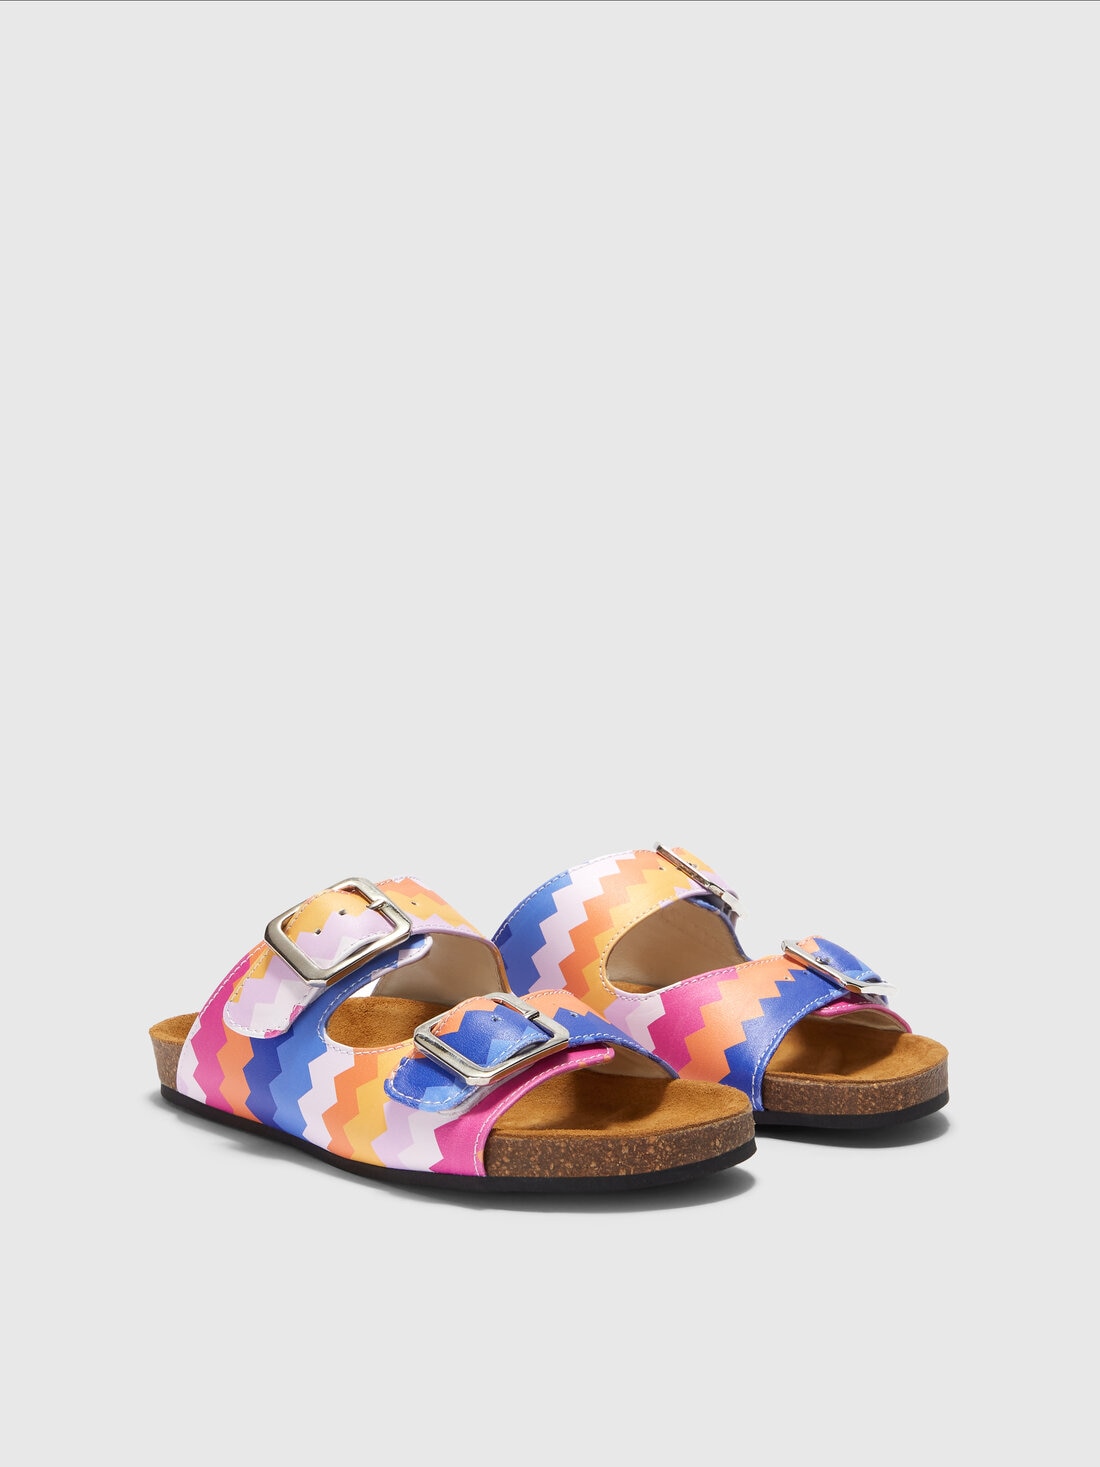 Sandals with double straps with chevron pattern, Multicoloured  - KS24SY01BV00FWSM923 - 1